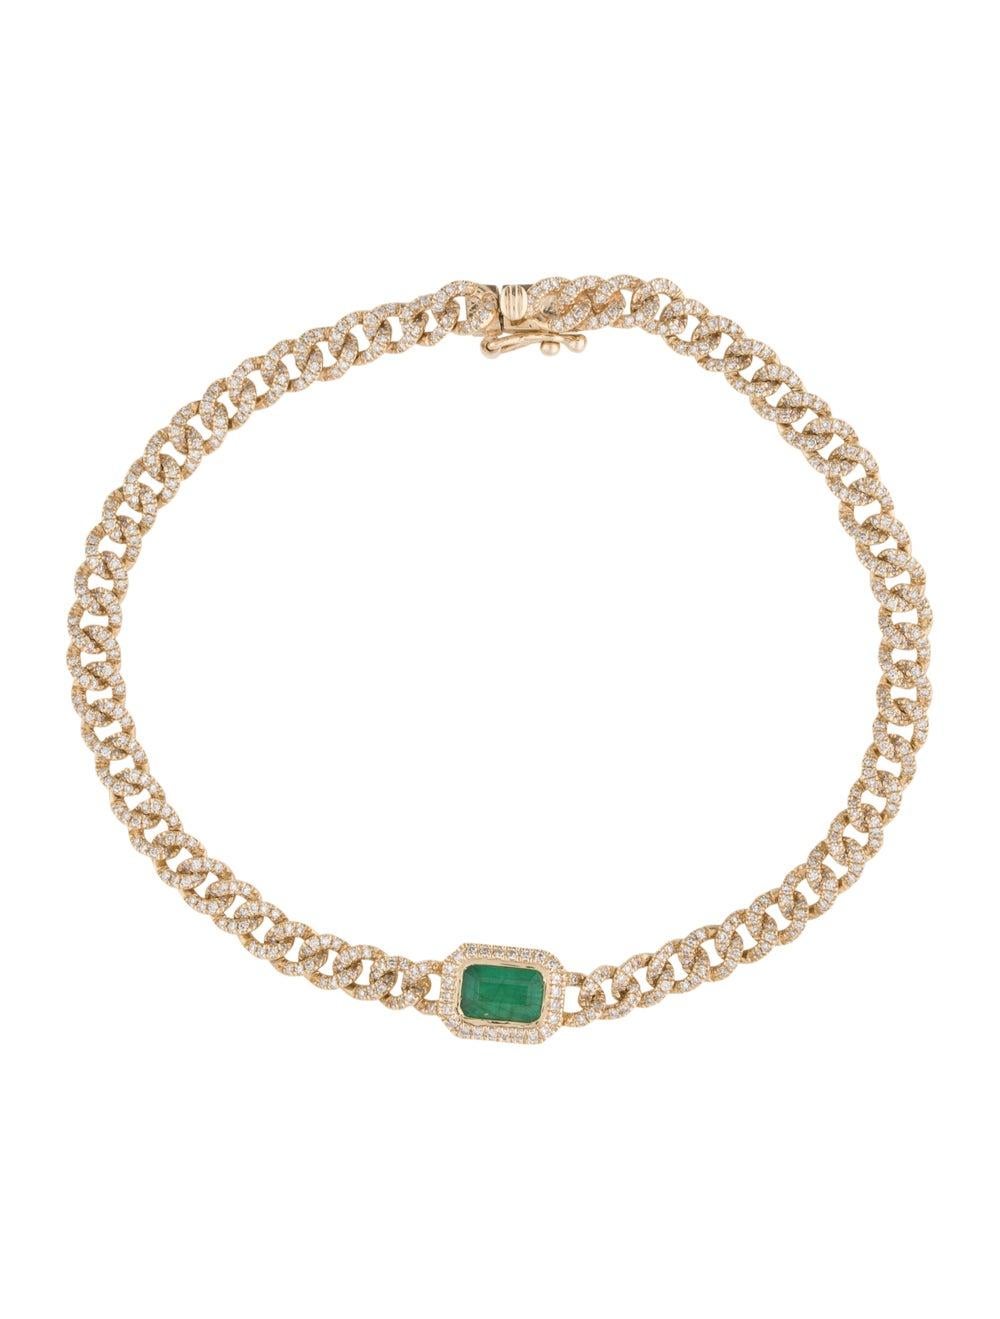 14K GOLD EMERALD & DIAMOND LINK BRACELET
     - Diamond Weight: 0.99 ct.
     - Emerald Weight: 0.53 ct.
     - Bracelet Length: 7 inches

This piece is perfect for everyday wear and makes the perfect Gift! 

We certify that this is an authentic